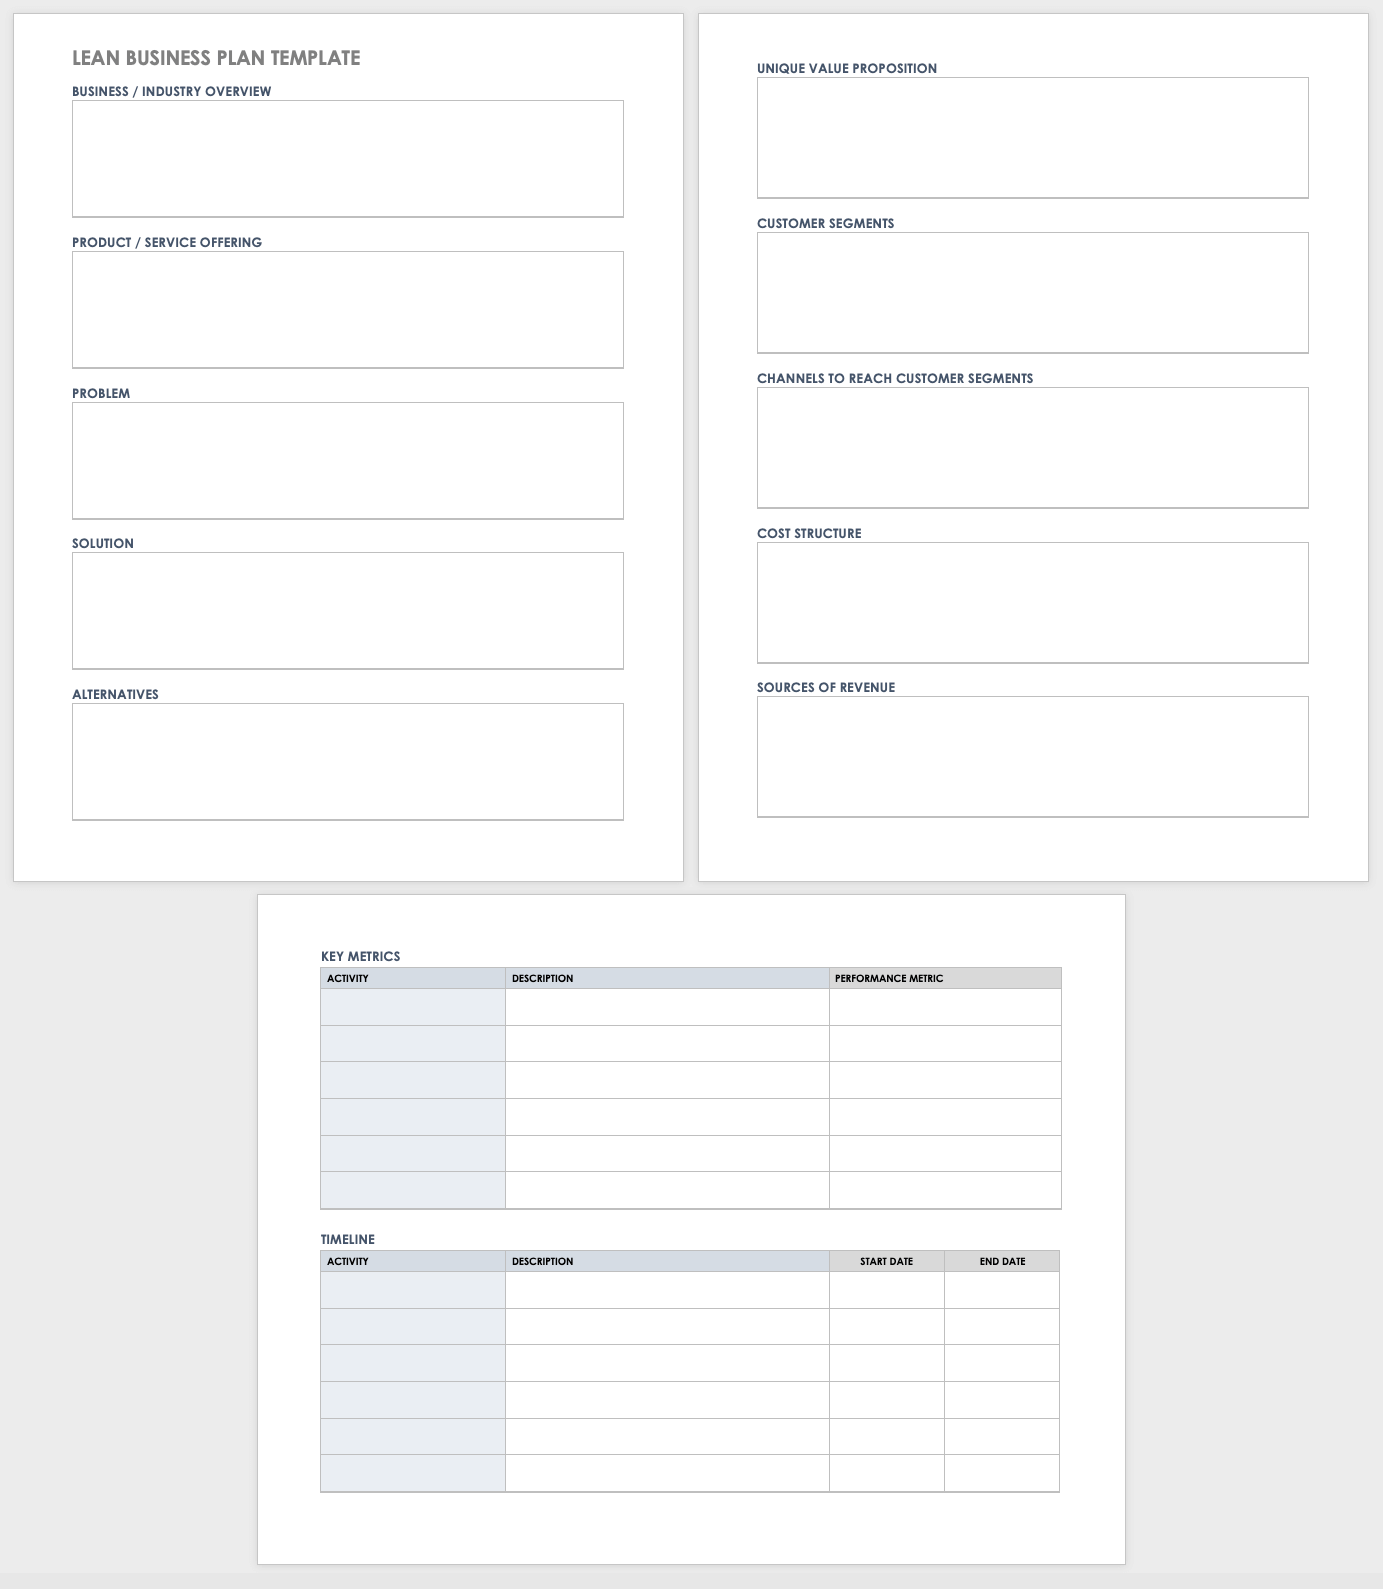 business-plan-template-free-download-excel